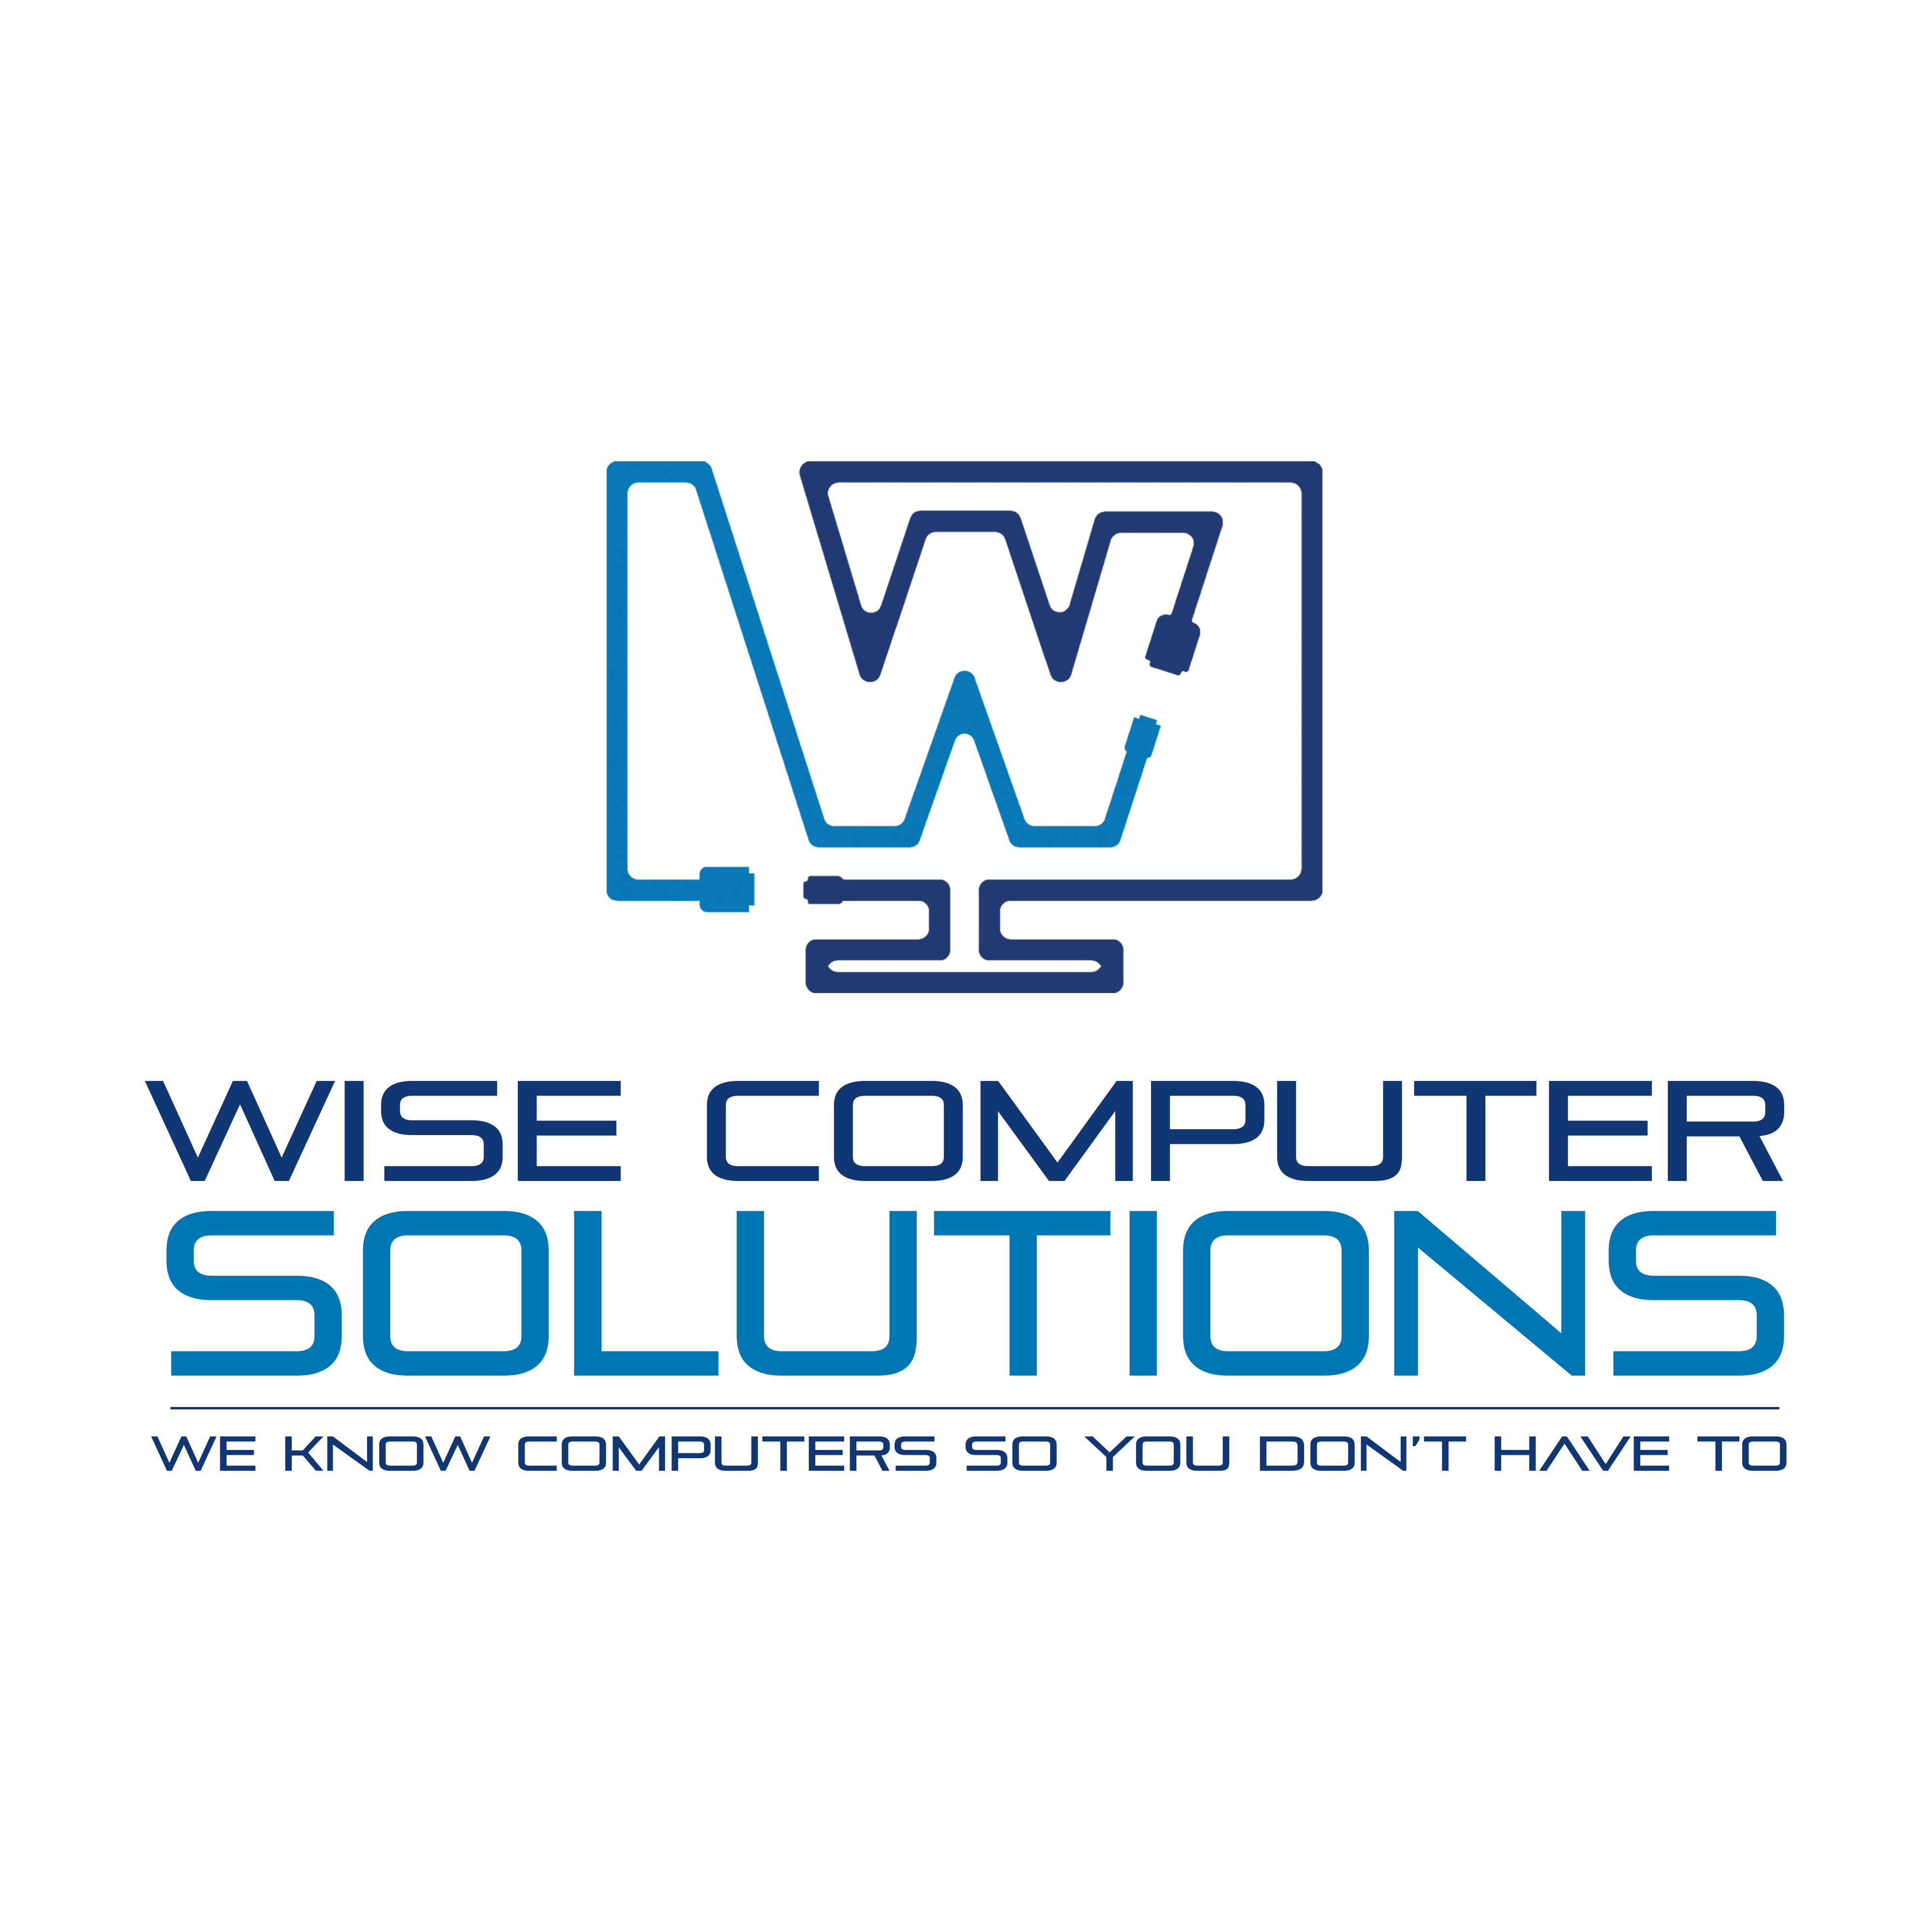 Wise Computer Solutions, Inc. Logo